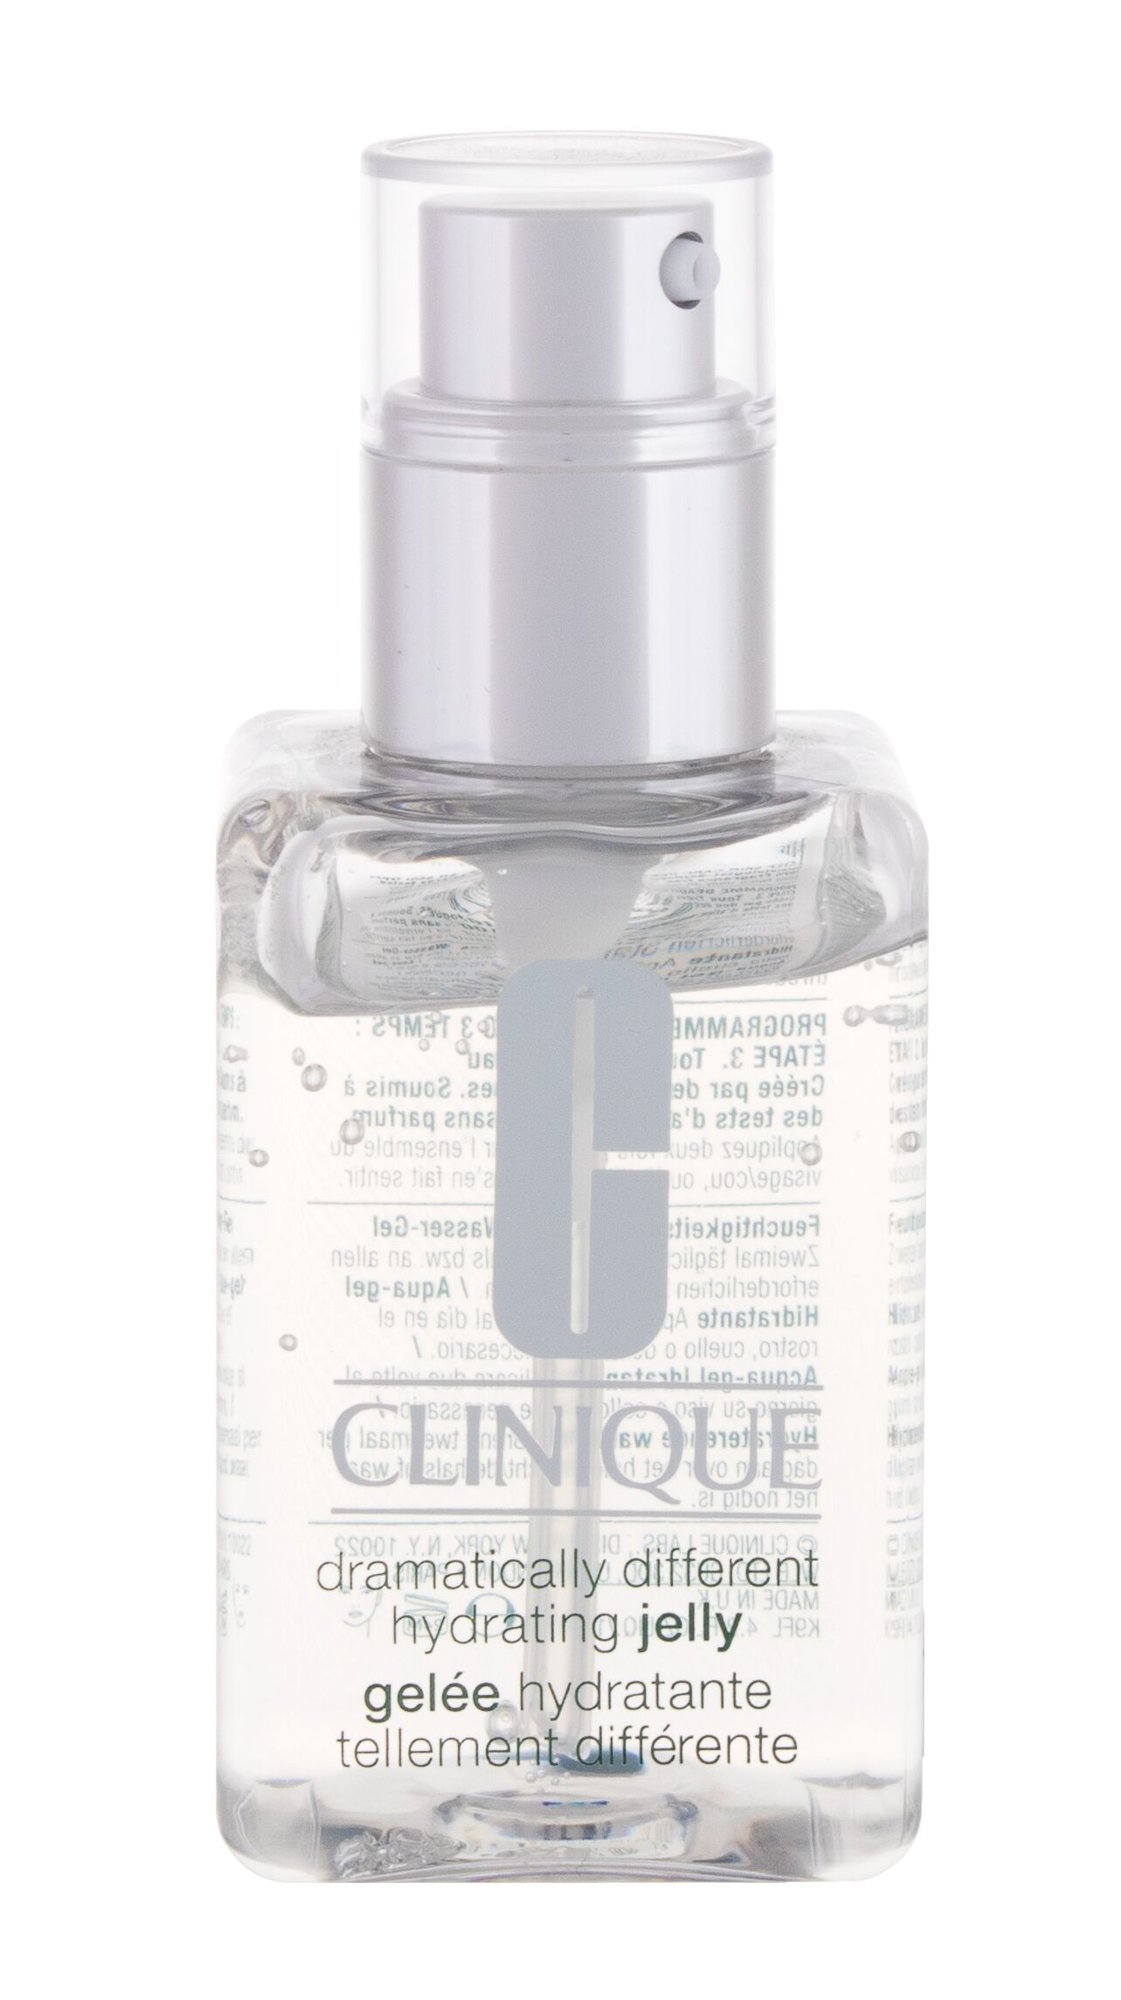 Clinique Clinique ID Dramatically Different Hydrating Jelly 125ml veido gelis Testeris